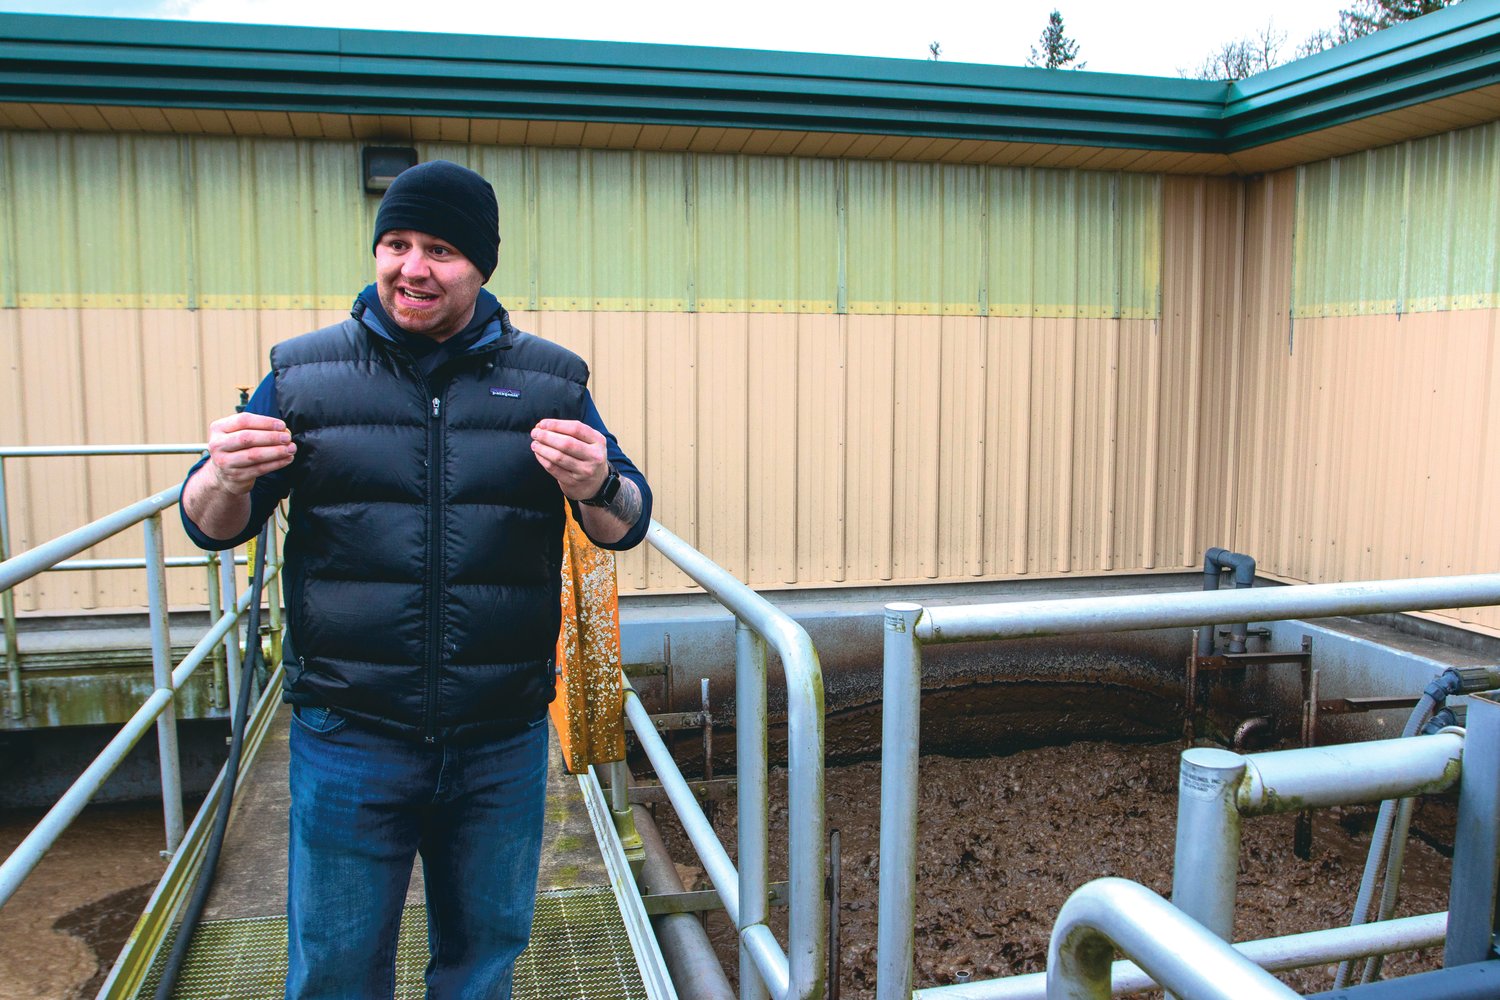 Tenino Mayor Wayne Fournier discusses the process in which wastewater is treated and his plans for how treated waste can be used as fertilizer in the future.